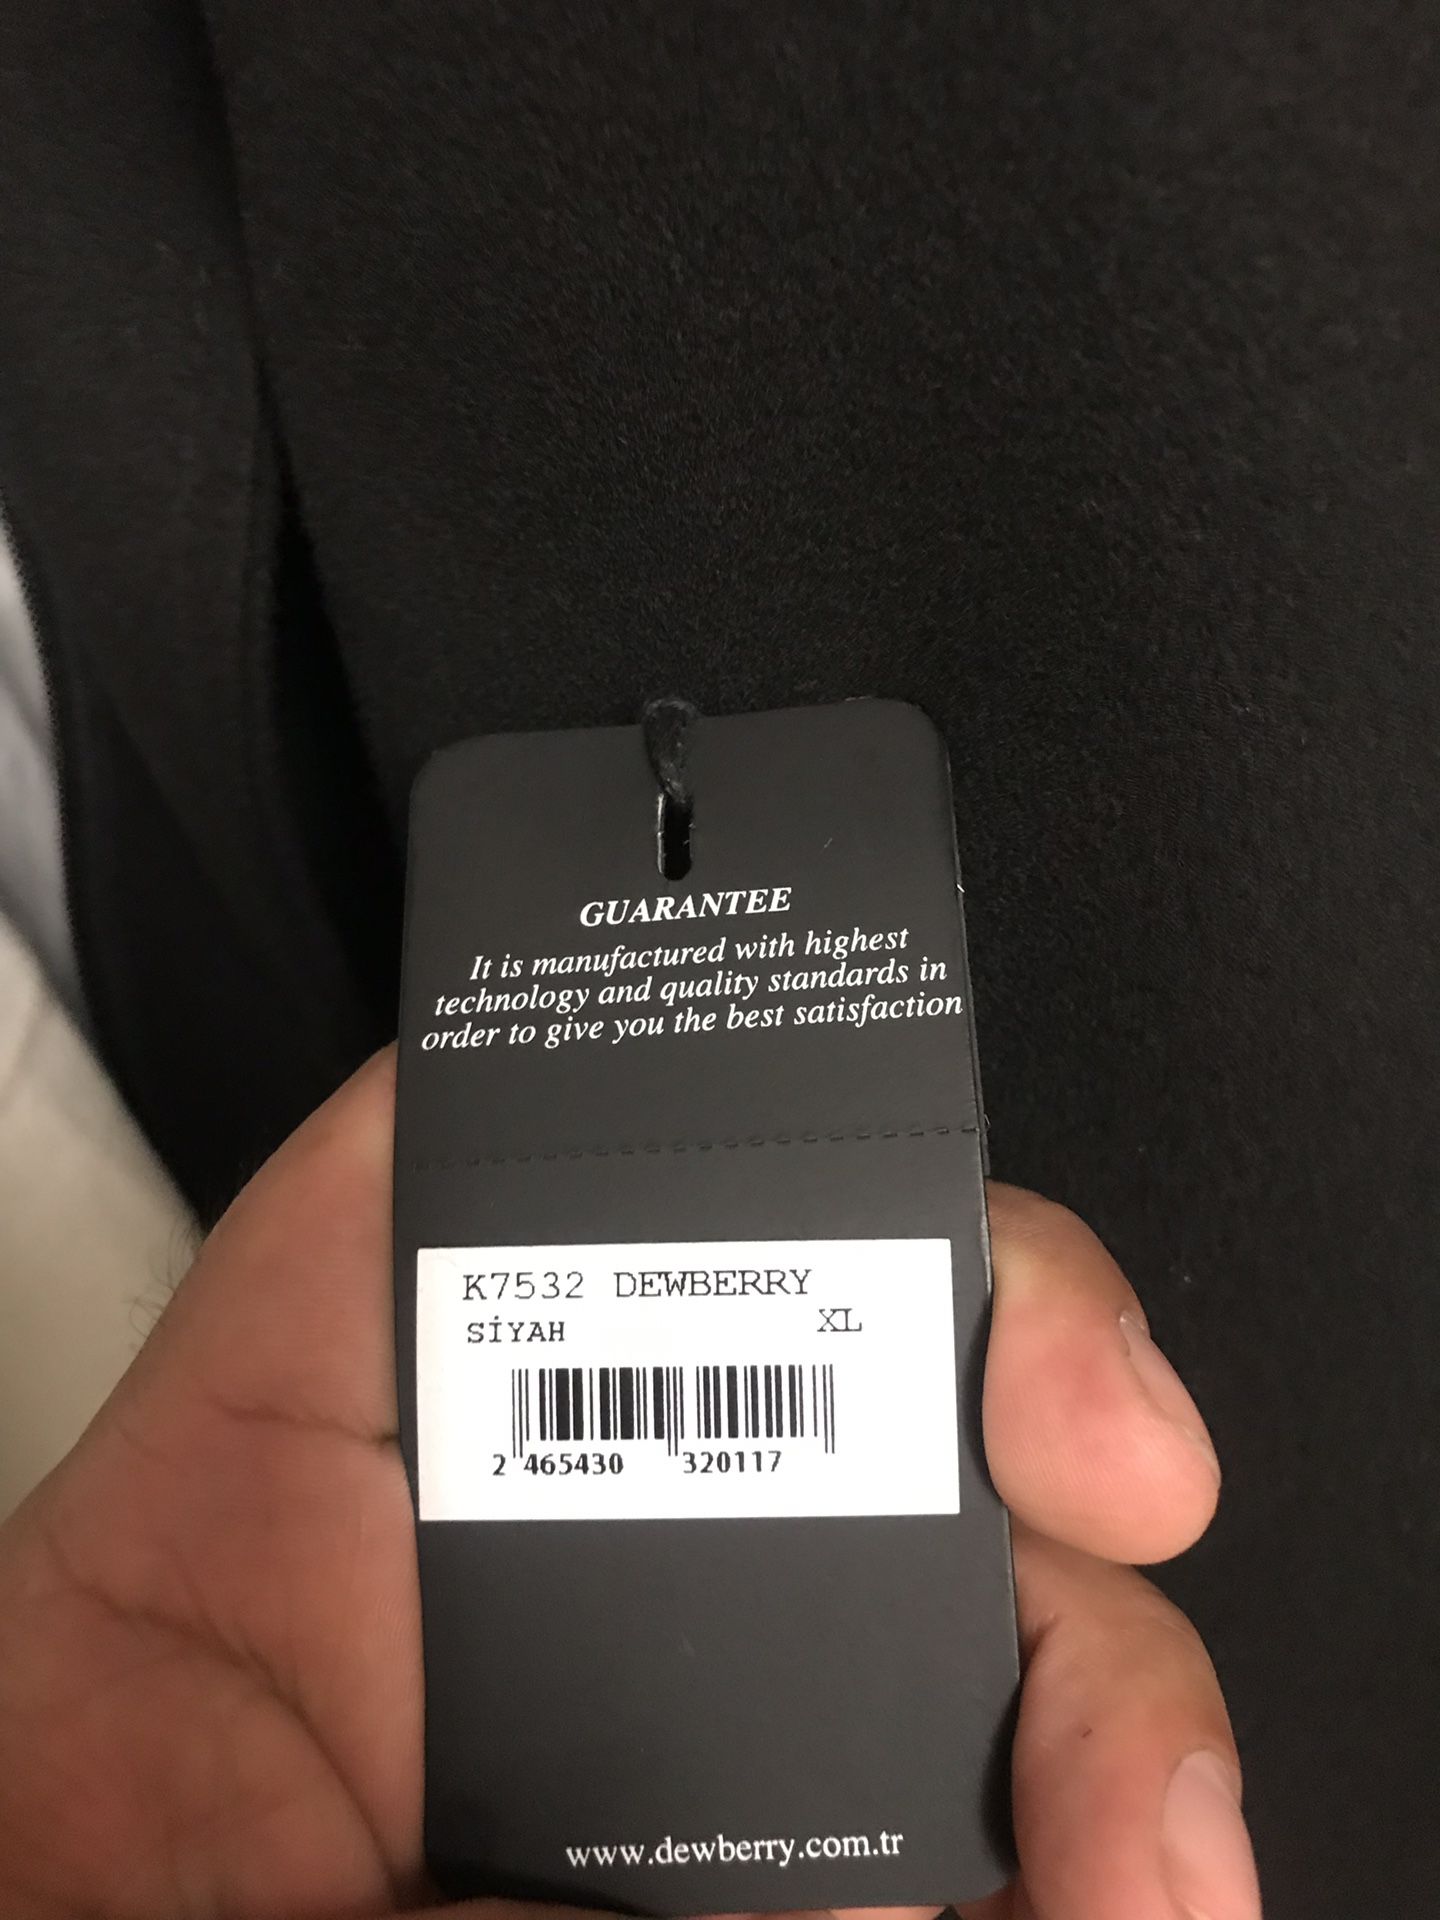 Dewberry Couture Deluxe Men’s Coat for Sale in Los Angeles, CA - OfferUp